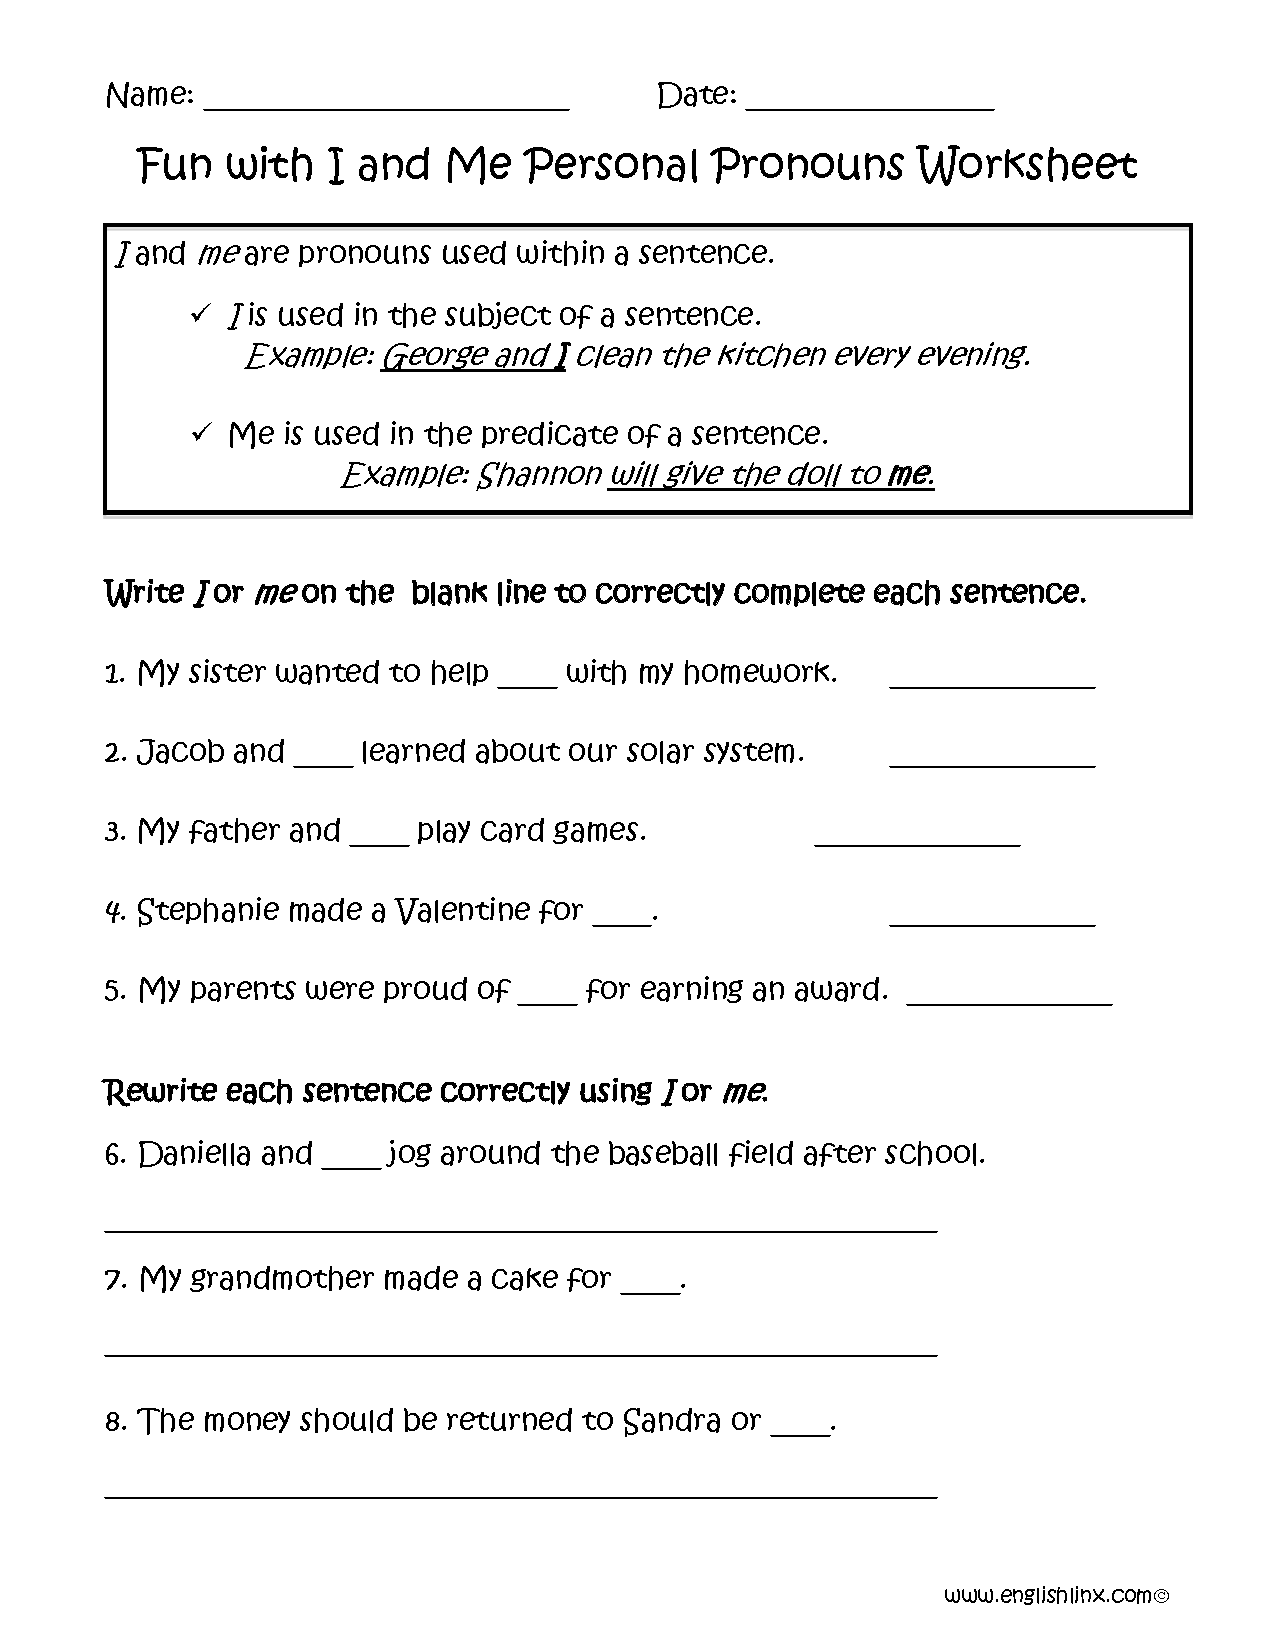 grade-3-grammar-topic-10-personal-pronouns-worksheets-lets-share-knowledge